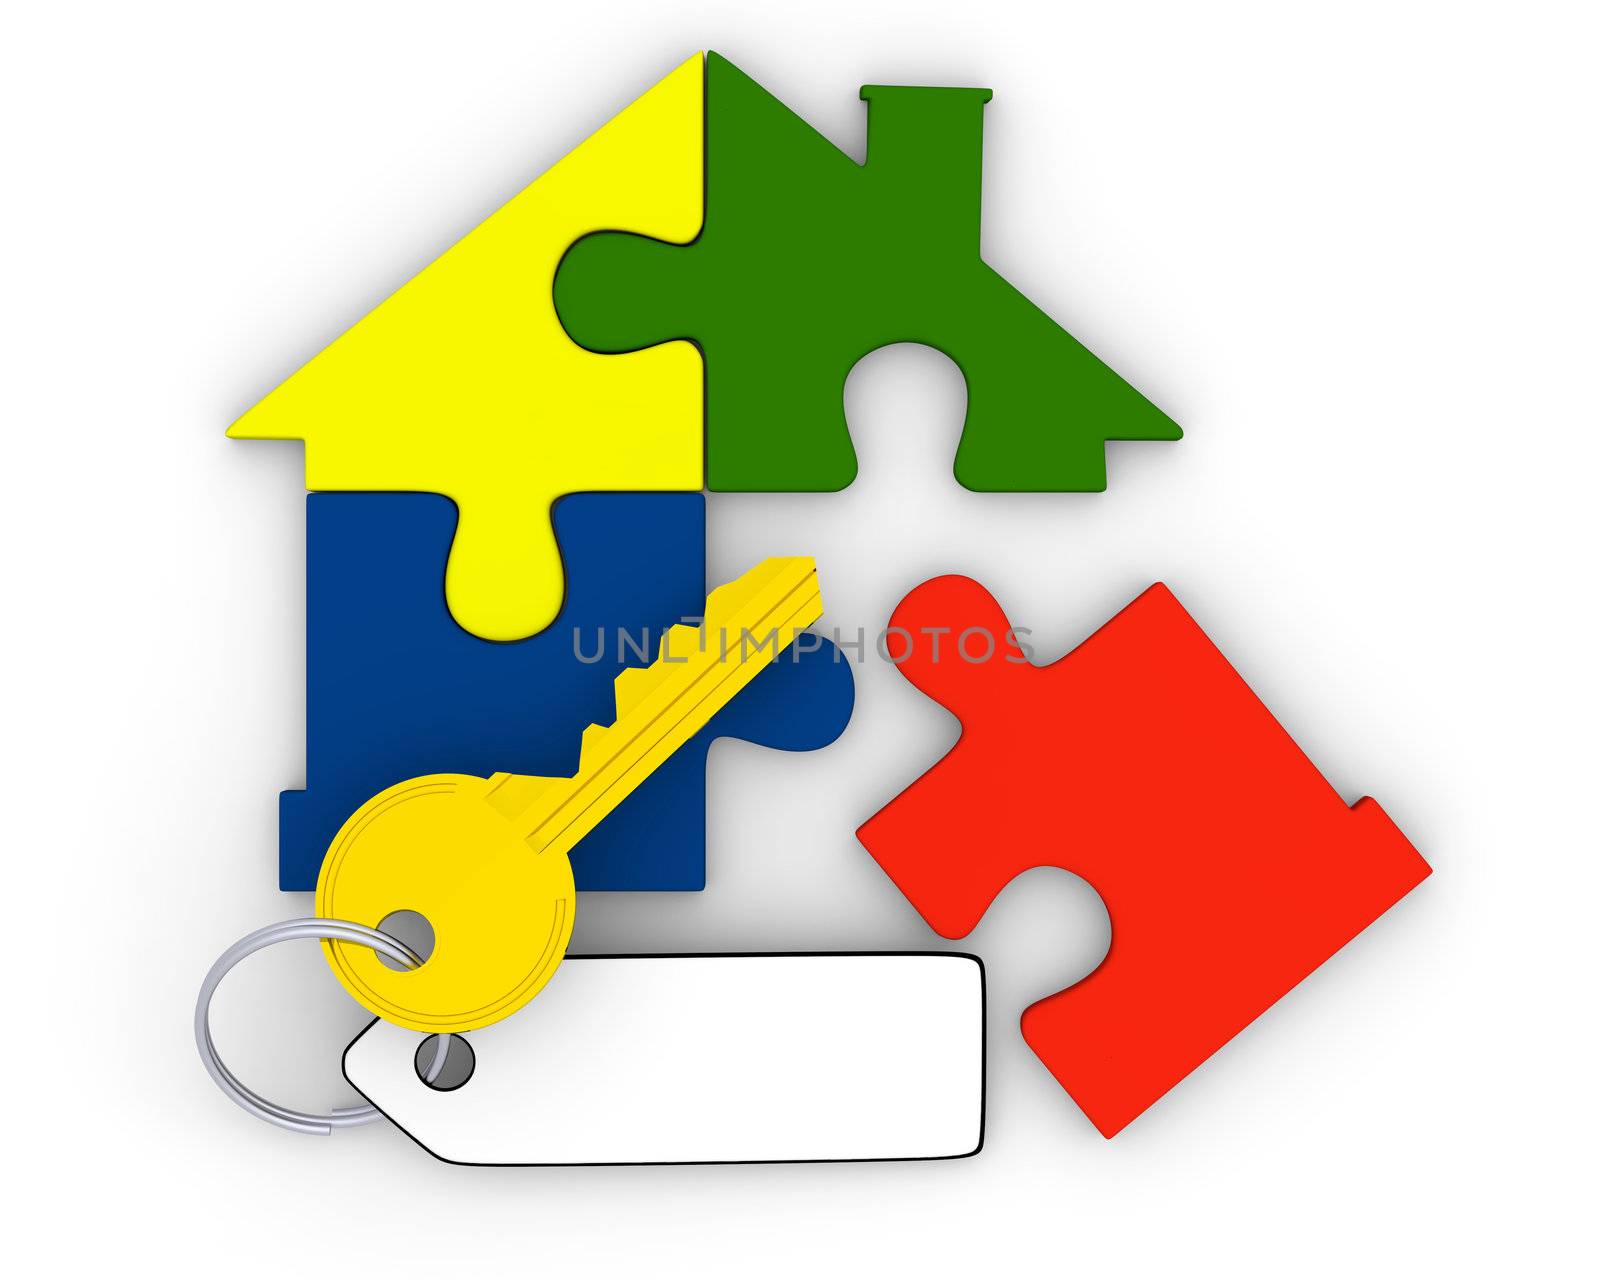 Golden key and house symbol made of four colorful puzzle pieces